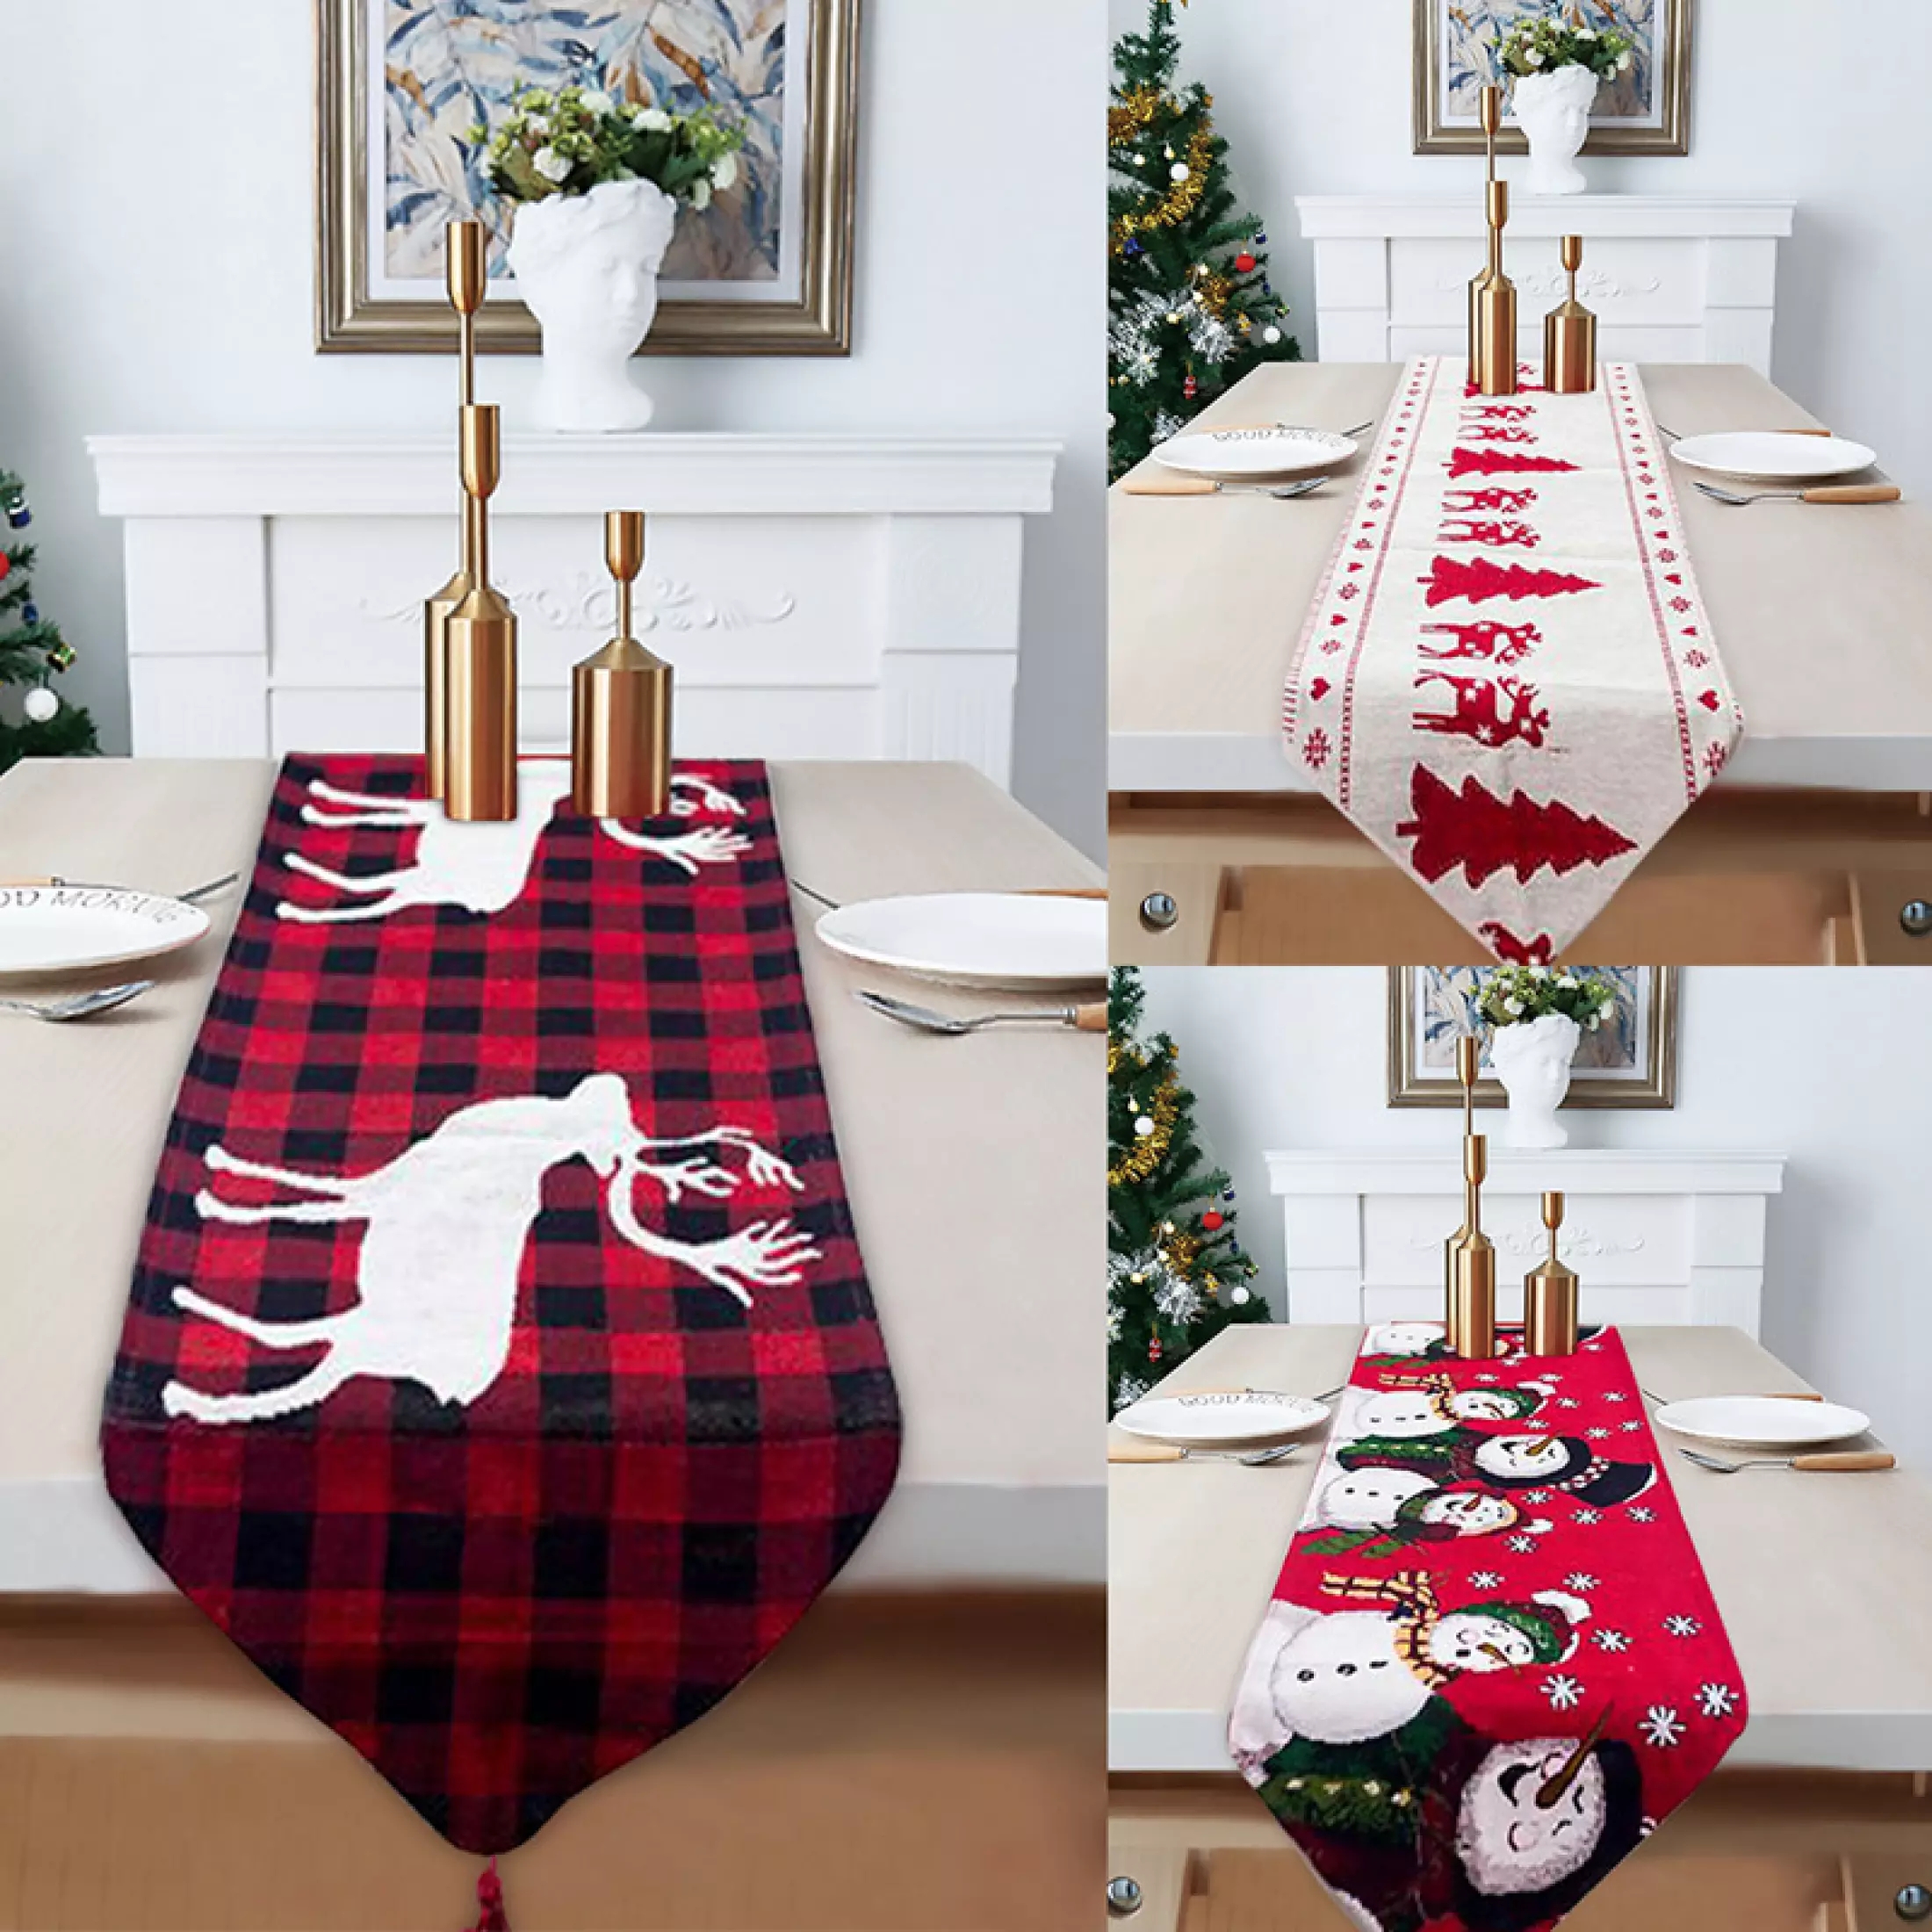 Table Runner Cover Tablecloth Cloth Christmas Decorations Cotton Linen Xmas Home 